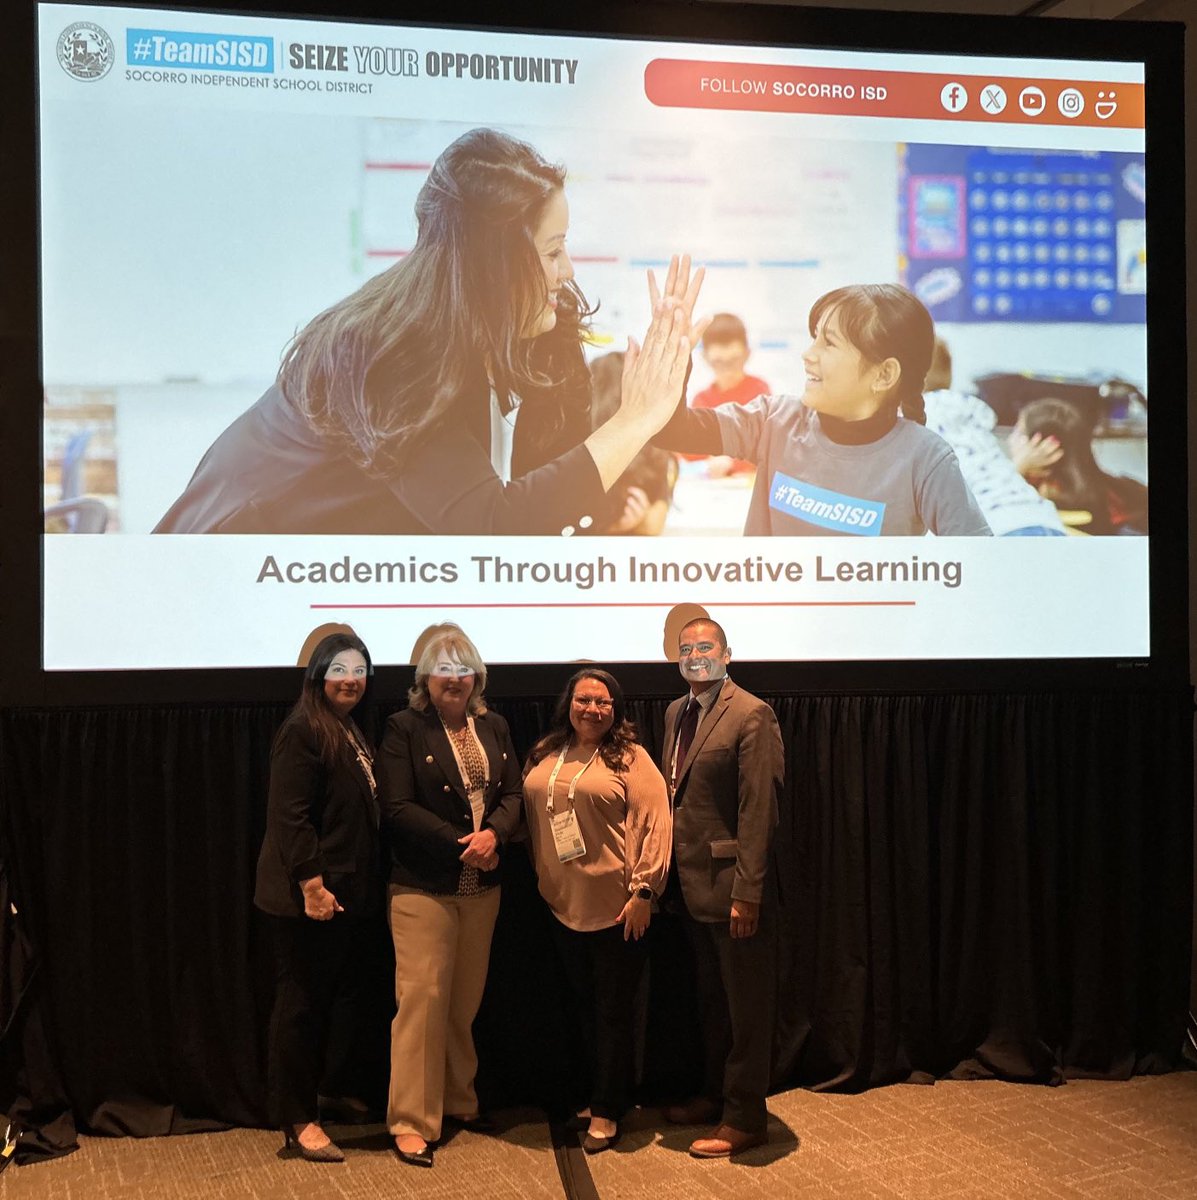 Socorro ISD is in the house! Our team presented at the TASA/TASB midwinter conference in Austin on the implementation of our innovative academies. Great job #TeamSISD ! ⁦@SISD_PK8⁩ ⁦@SISD_FineArts⁩ ⁦@SISD_Fin⁩